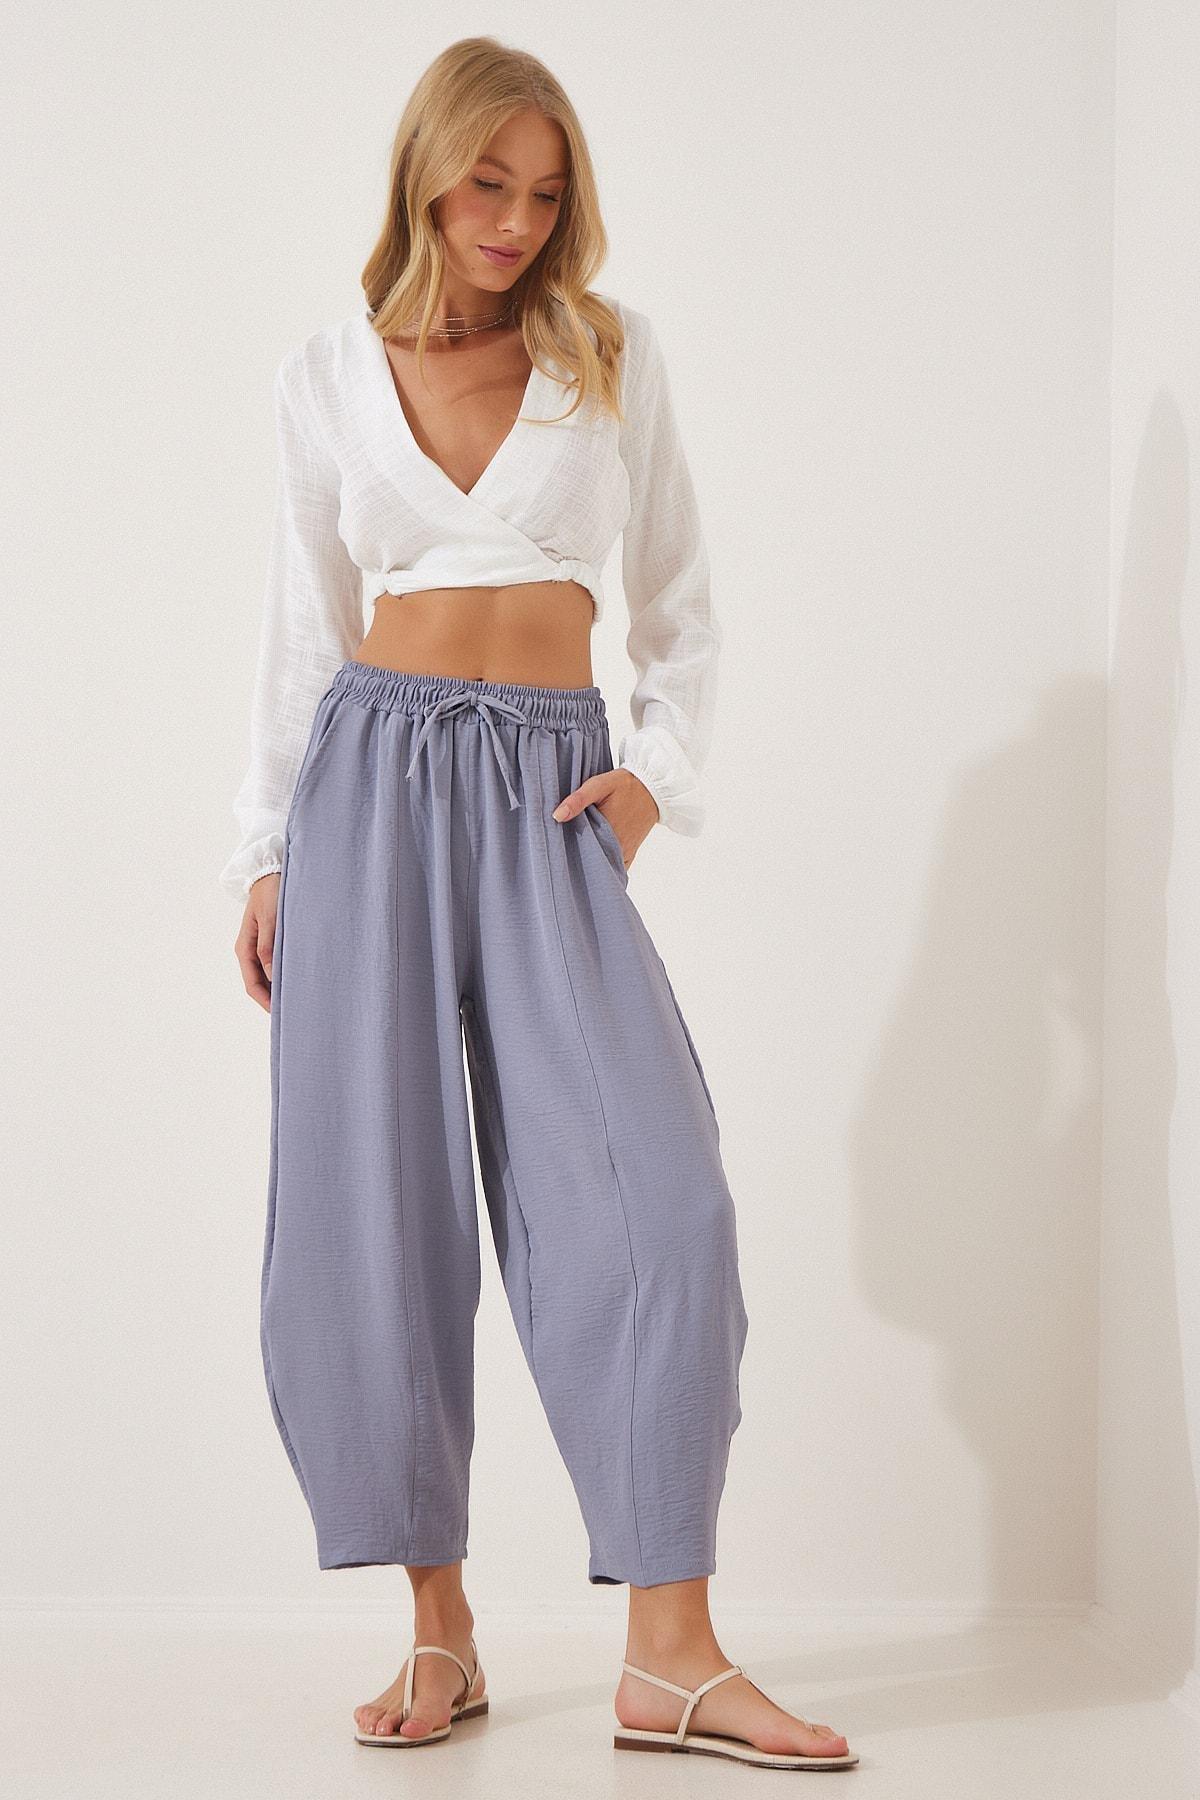 Happiness Istanbul - Grey Mid Waist Carrot Pants